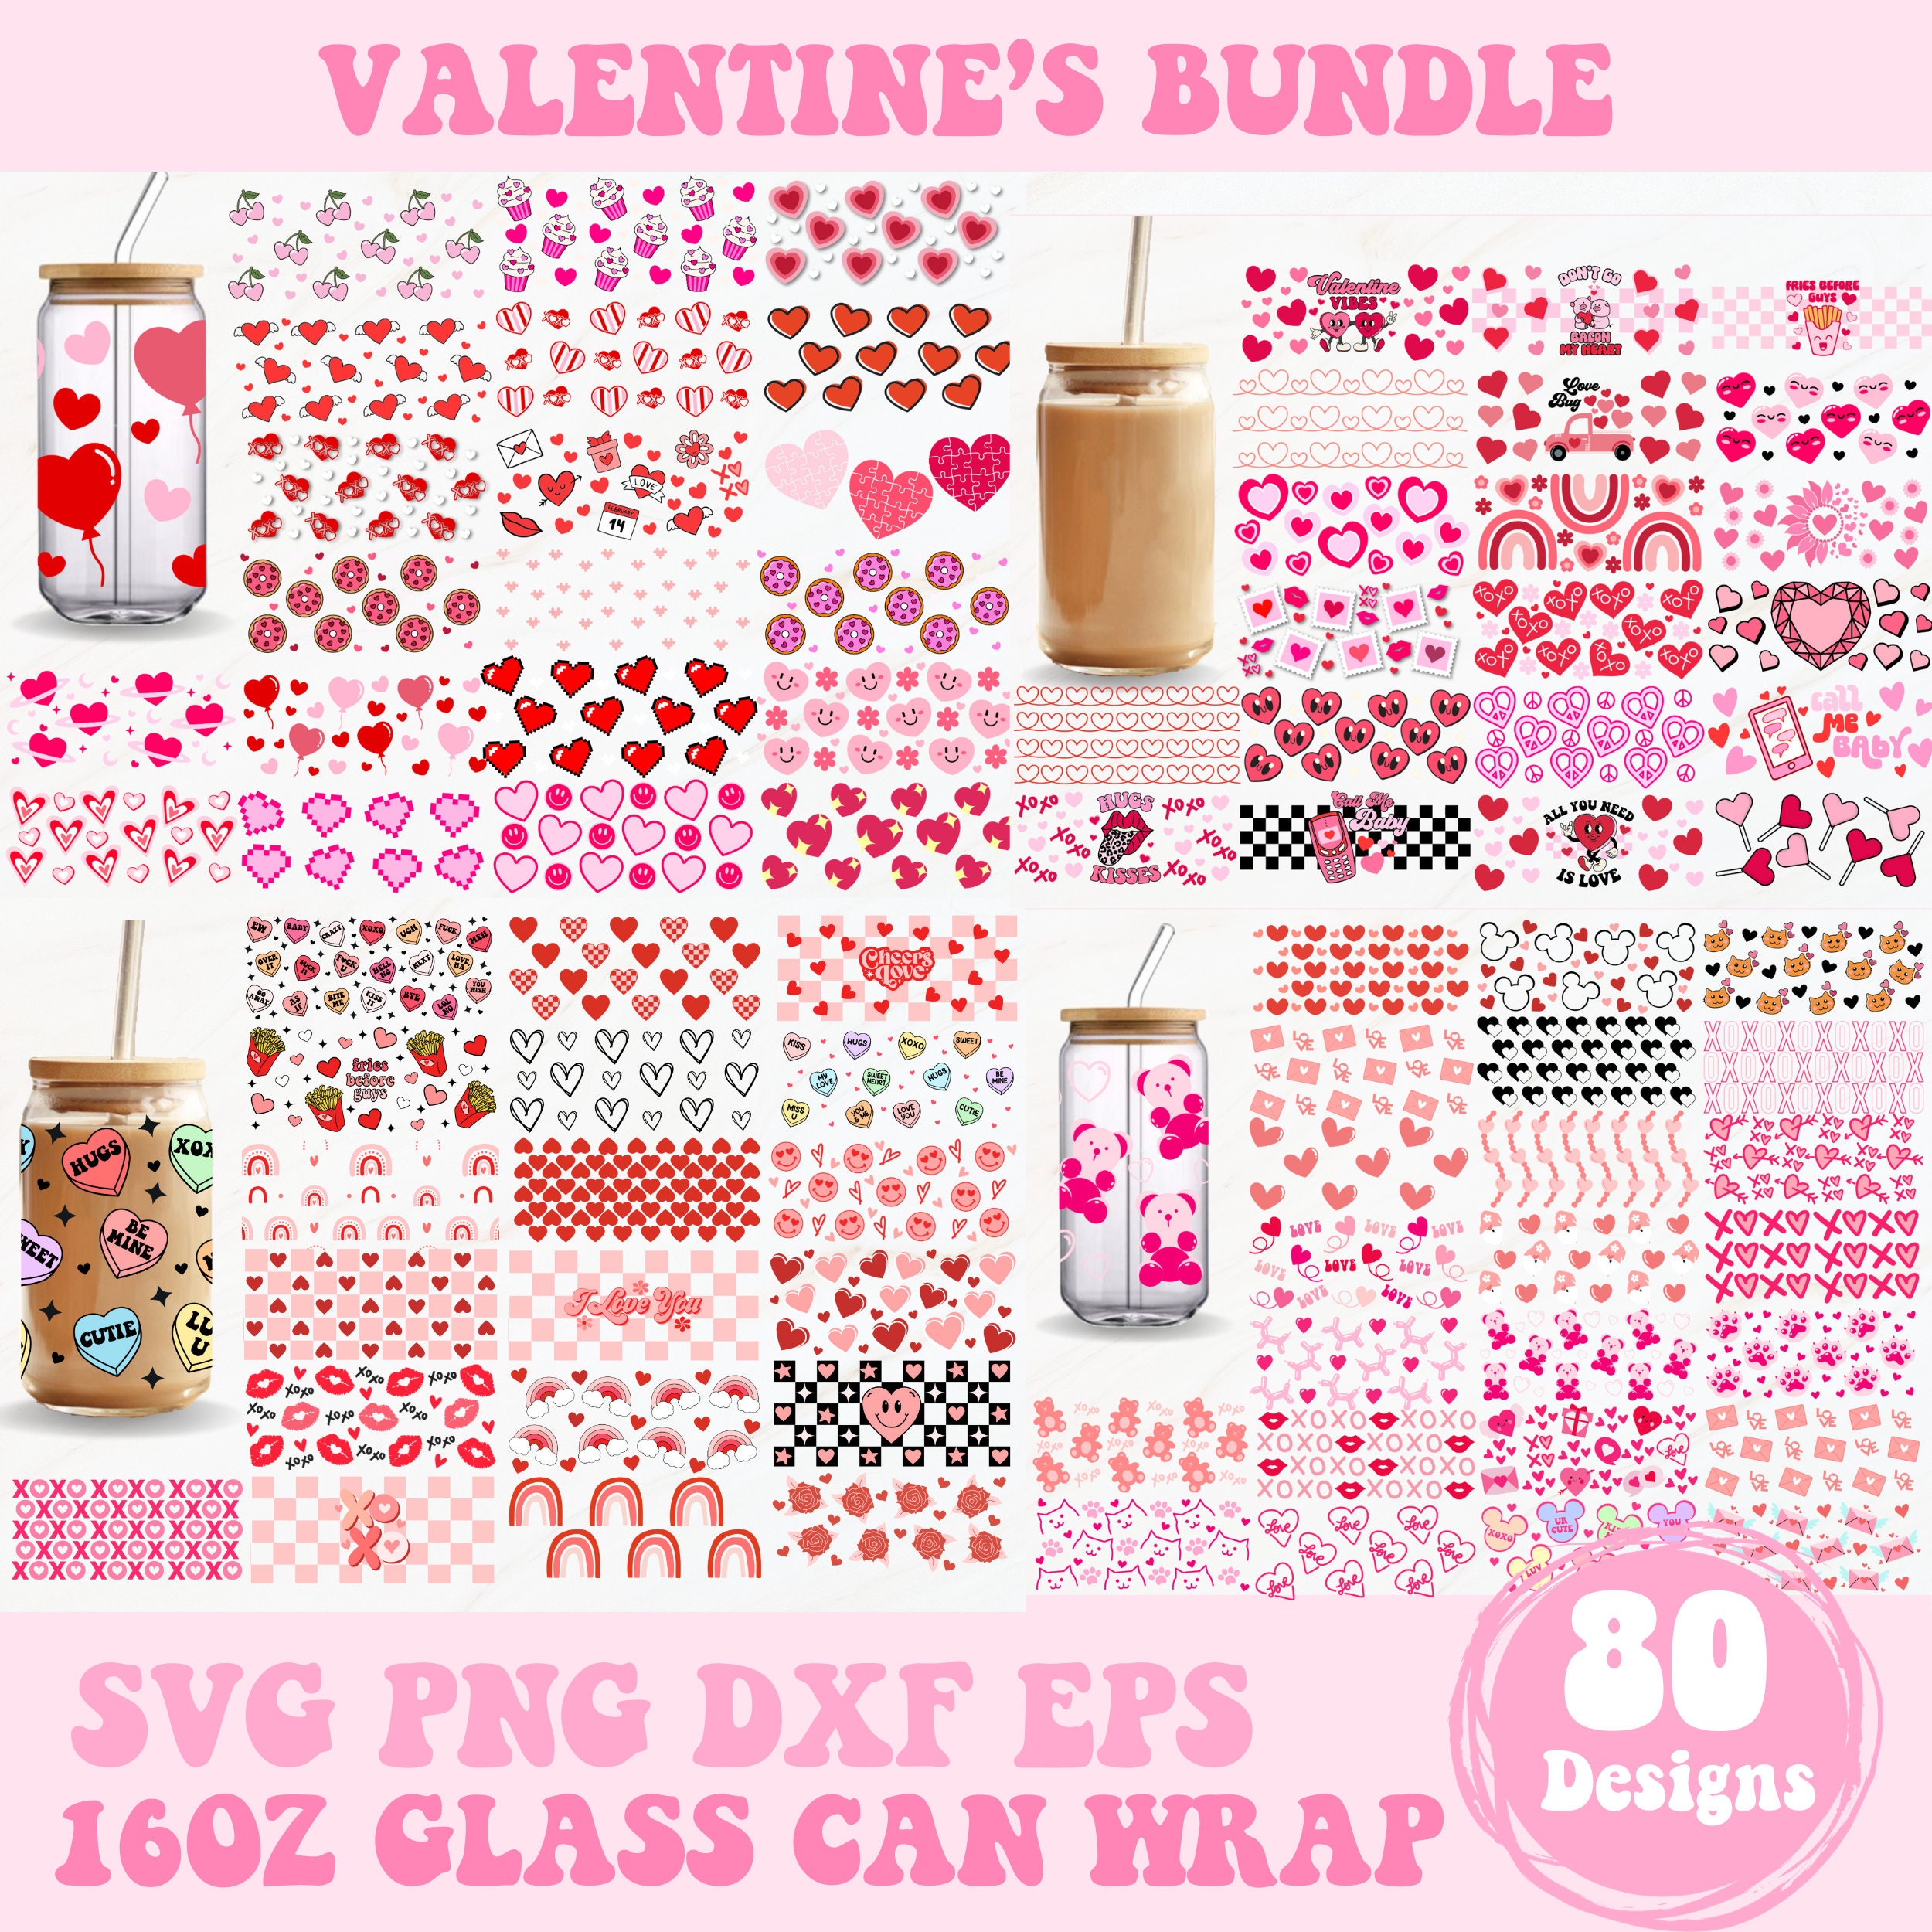 Valentines cups Sticker for Sale by Kalea77